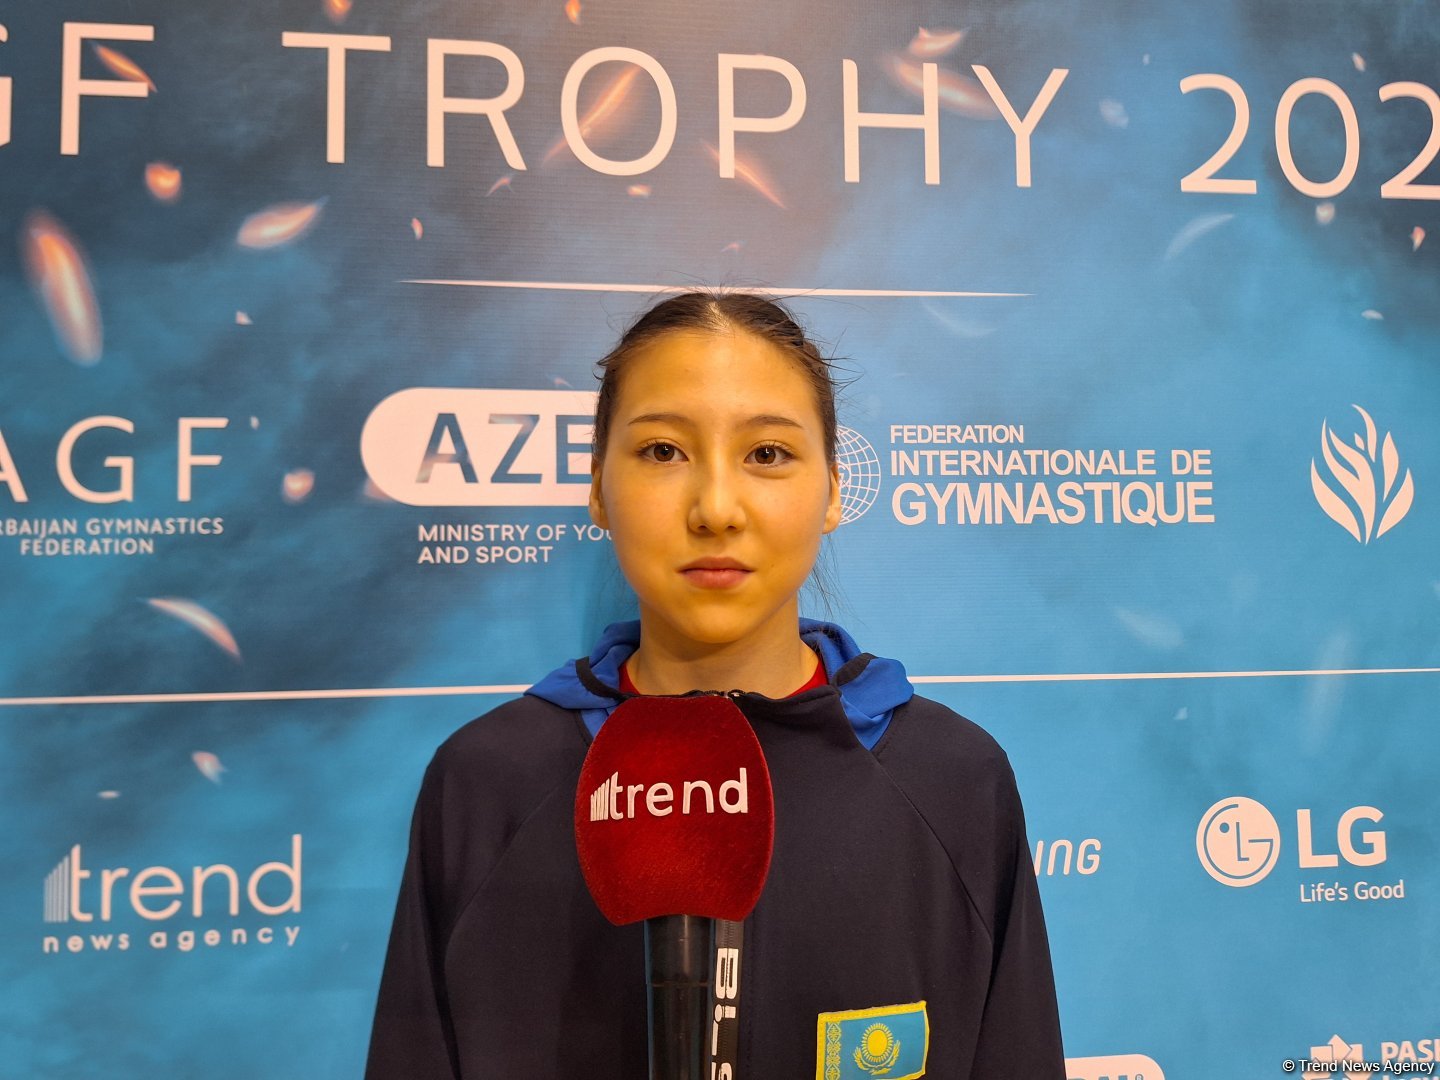 All participants of Artistic Gymnastics World Cup in Baku motivated to win - Kazakh athlete